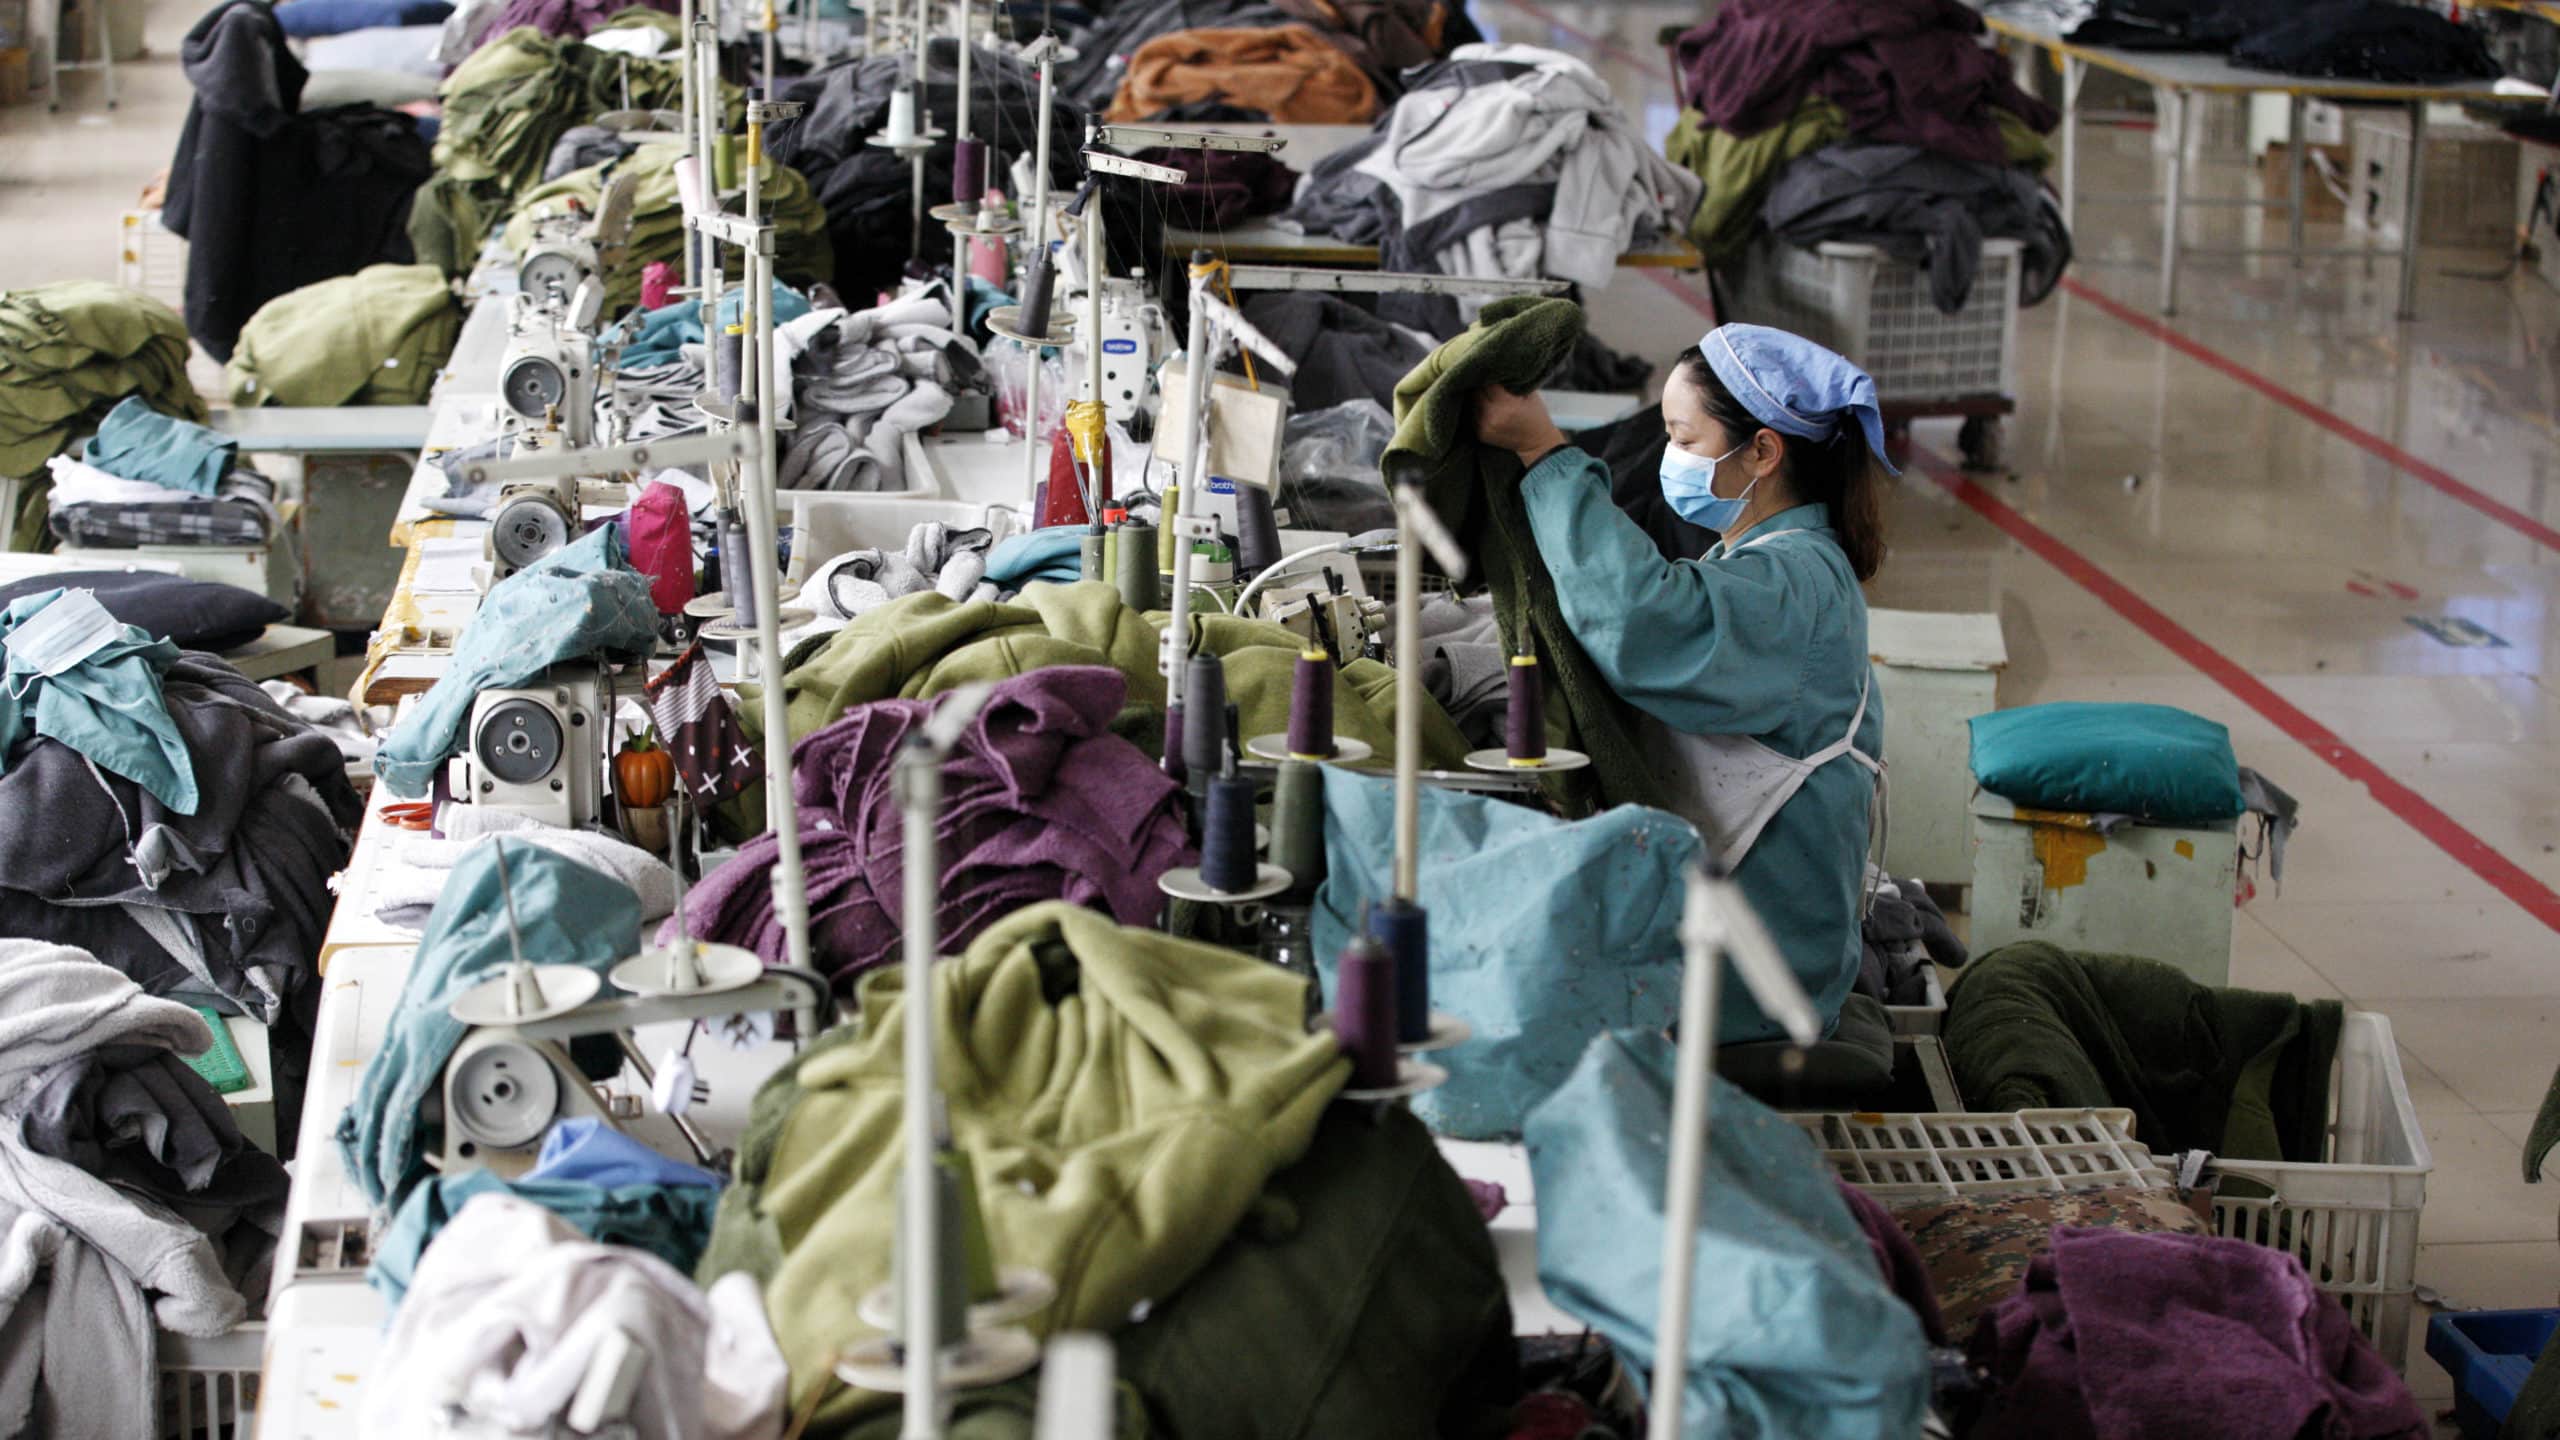 workers at a garment factory produce clothing.